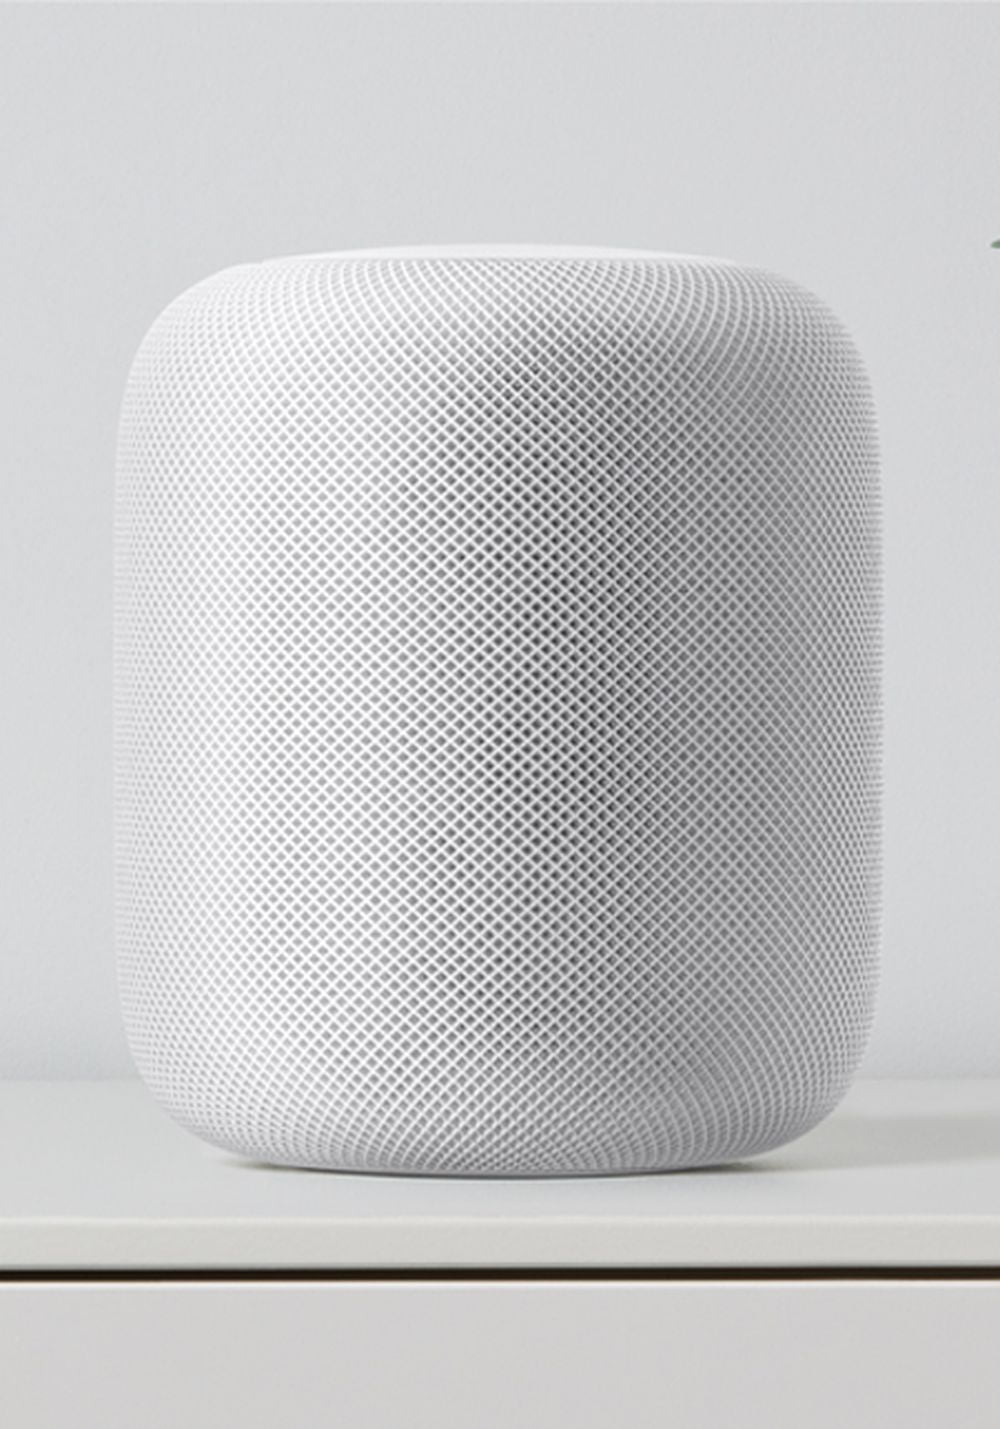 Samsung will compete with the HomePod with a new product